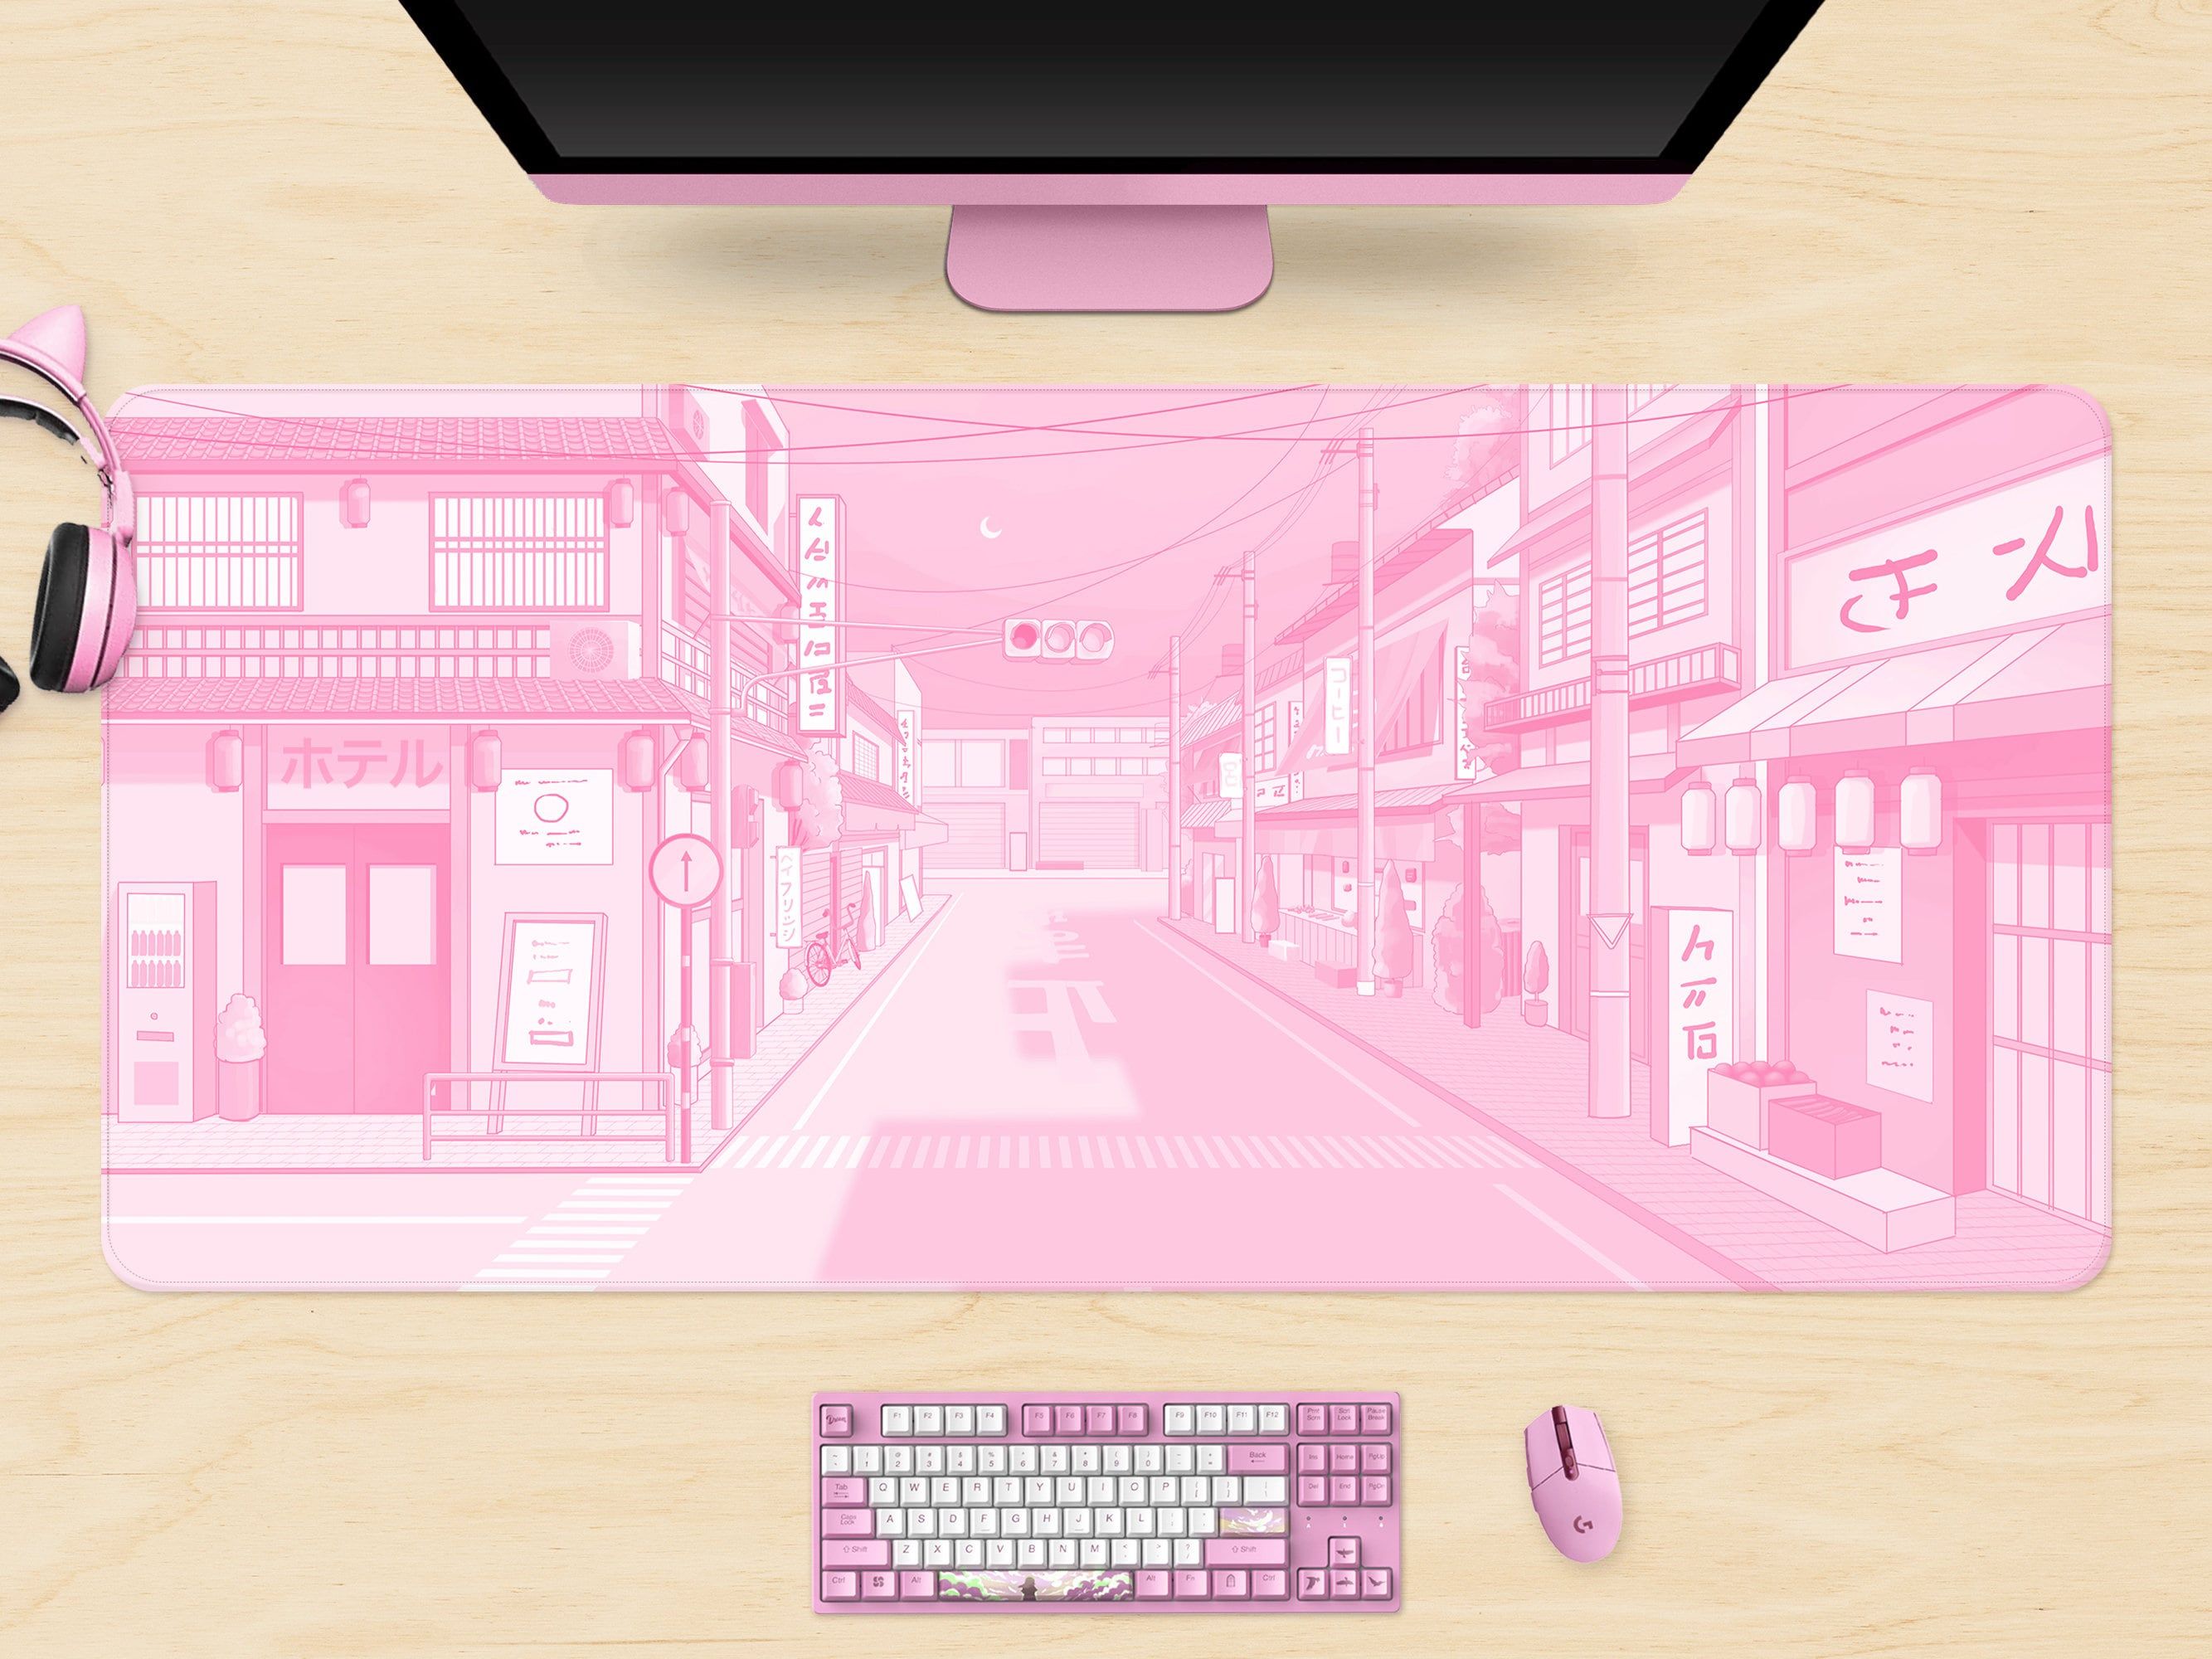 A computer monitor and keyboard on top of an office desk - Pink anime